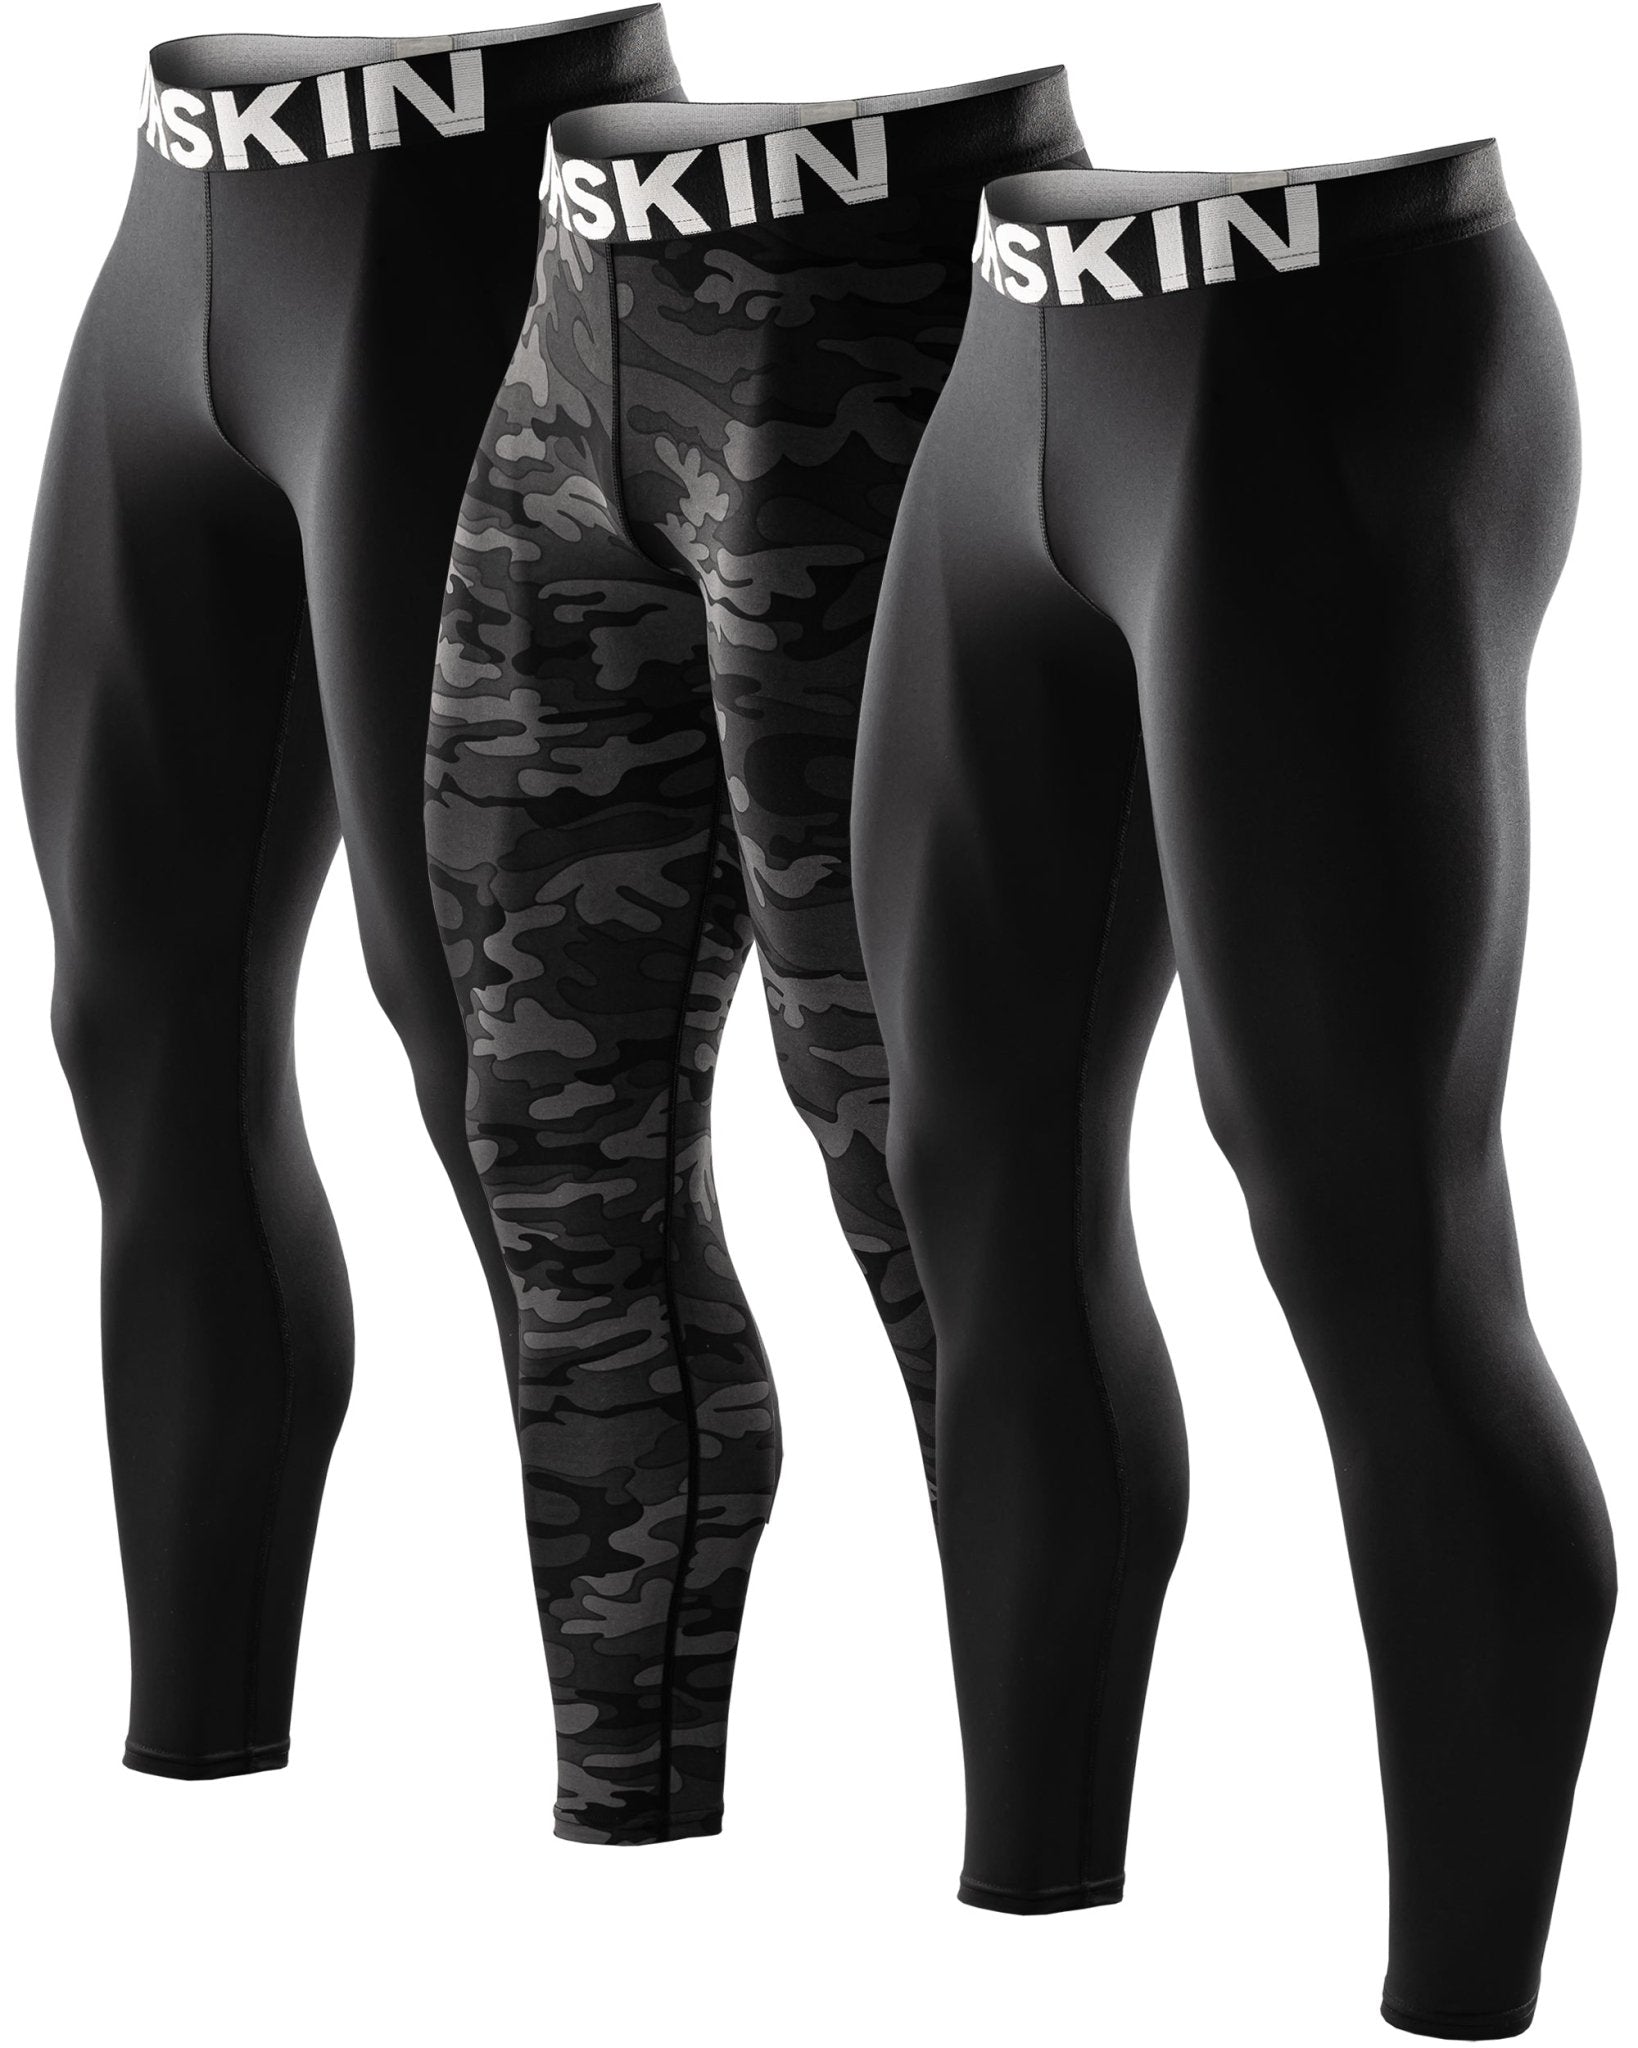 DRSKIN Men's Compression Pants Tights Leggings Sports Baselayer Running  Athletic Workout Activedn – DRSKINSPORTS